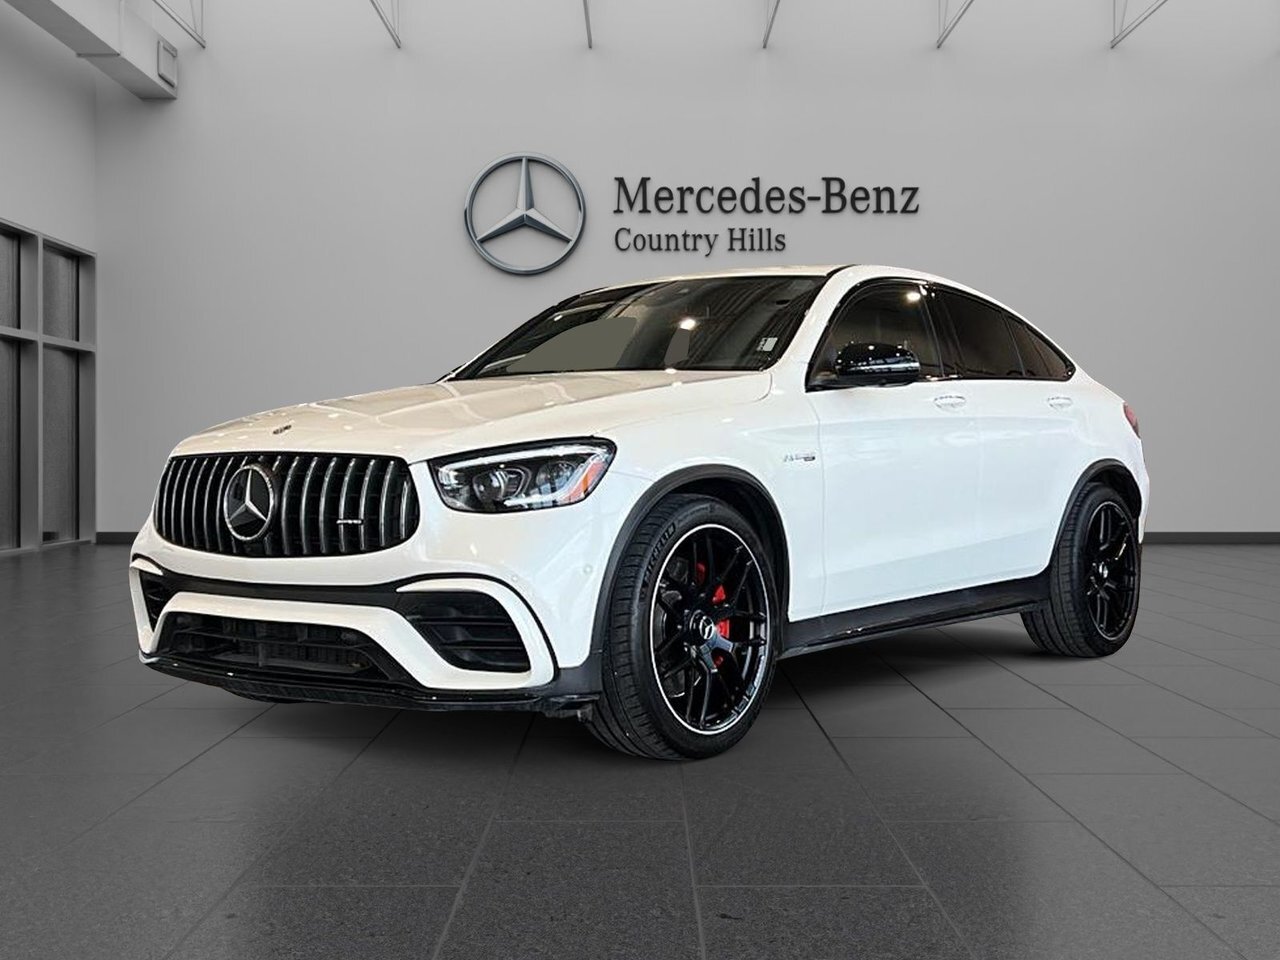 2020 Mercedes-Benz GLC63 AMG S 4MATIC+ Coupe AMG COUPE! one owner, no accidents